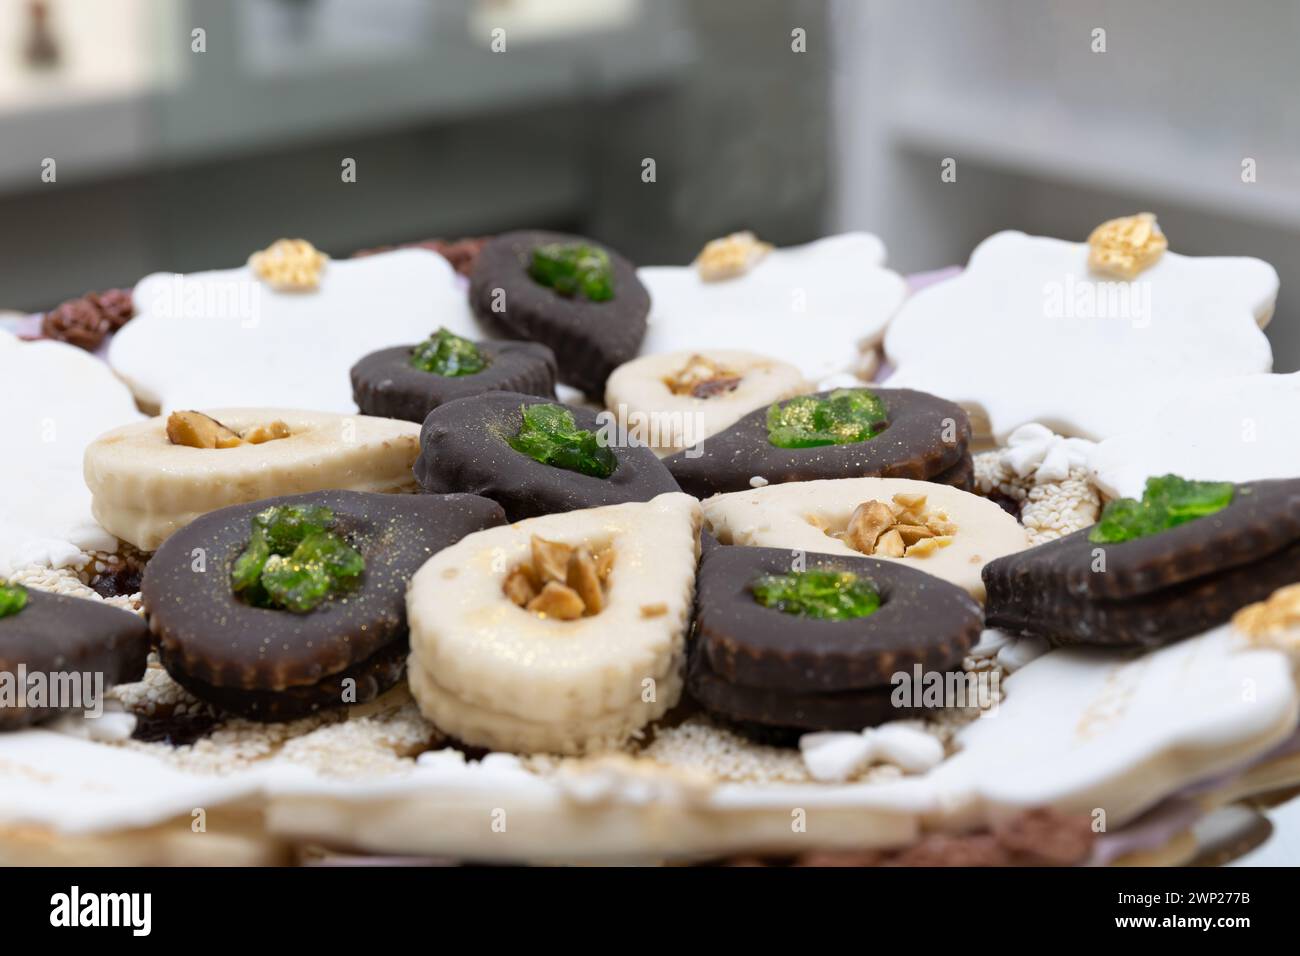 Horizontal photo artisanal Arabic sweets, chocolate and vanilla flavored, adorned with nuts and mint, presented on a traditional white plate. Food and Stock Photo